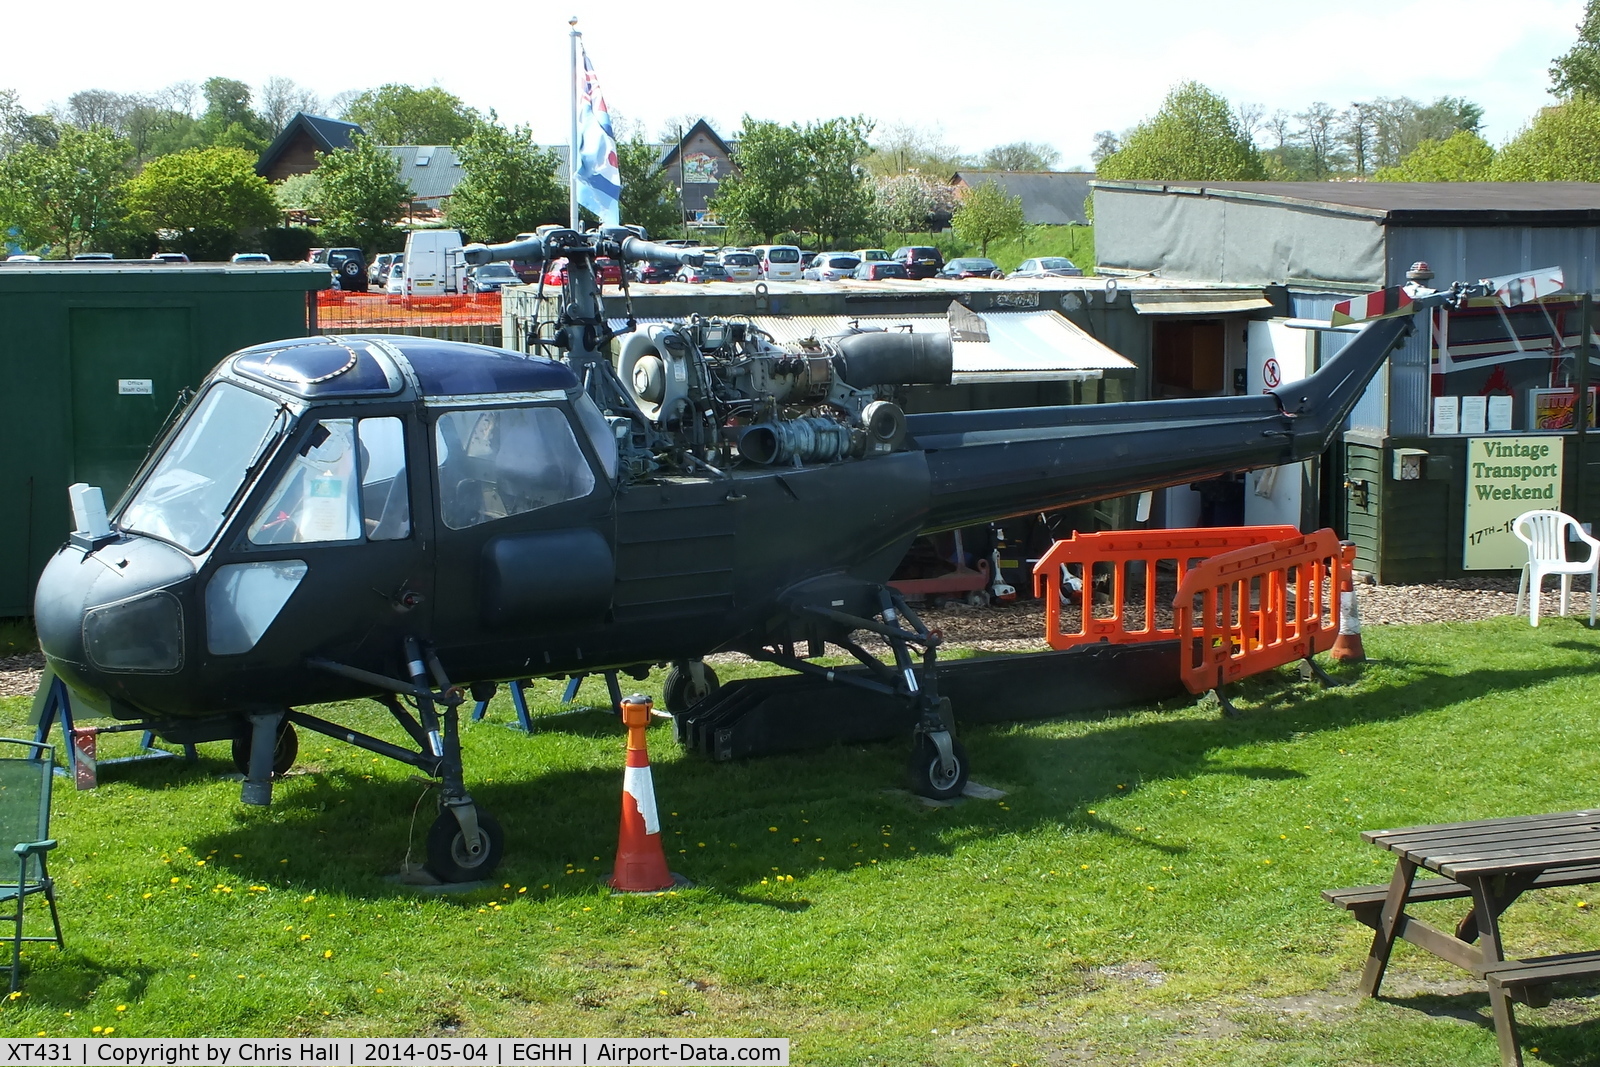 XT431, 1965 Westland Wasp HAS.1 C/N F9601, at the Bournemouth Aviaton Museum